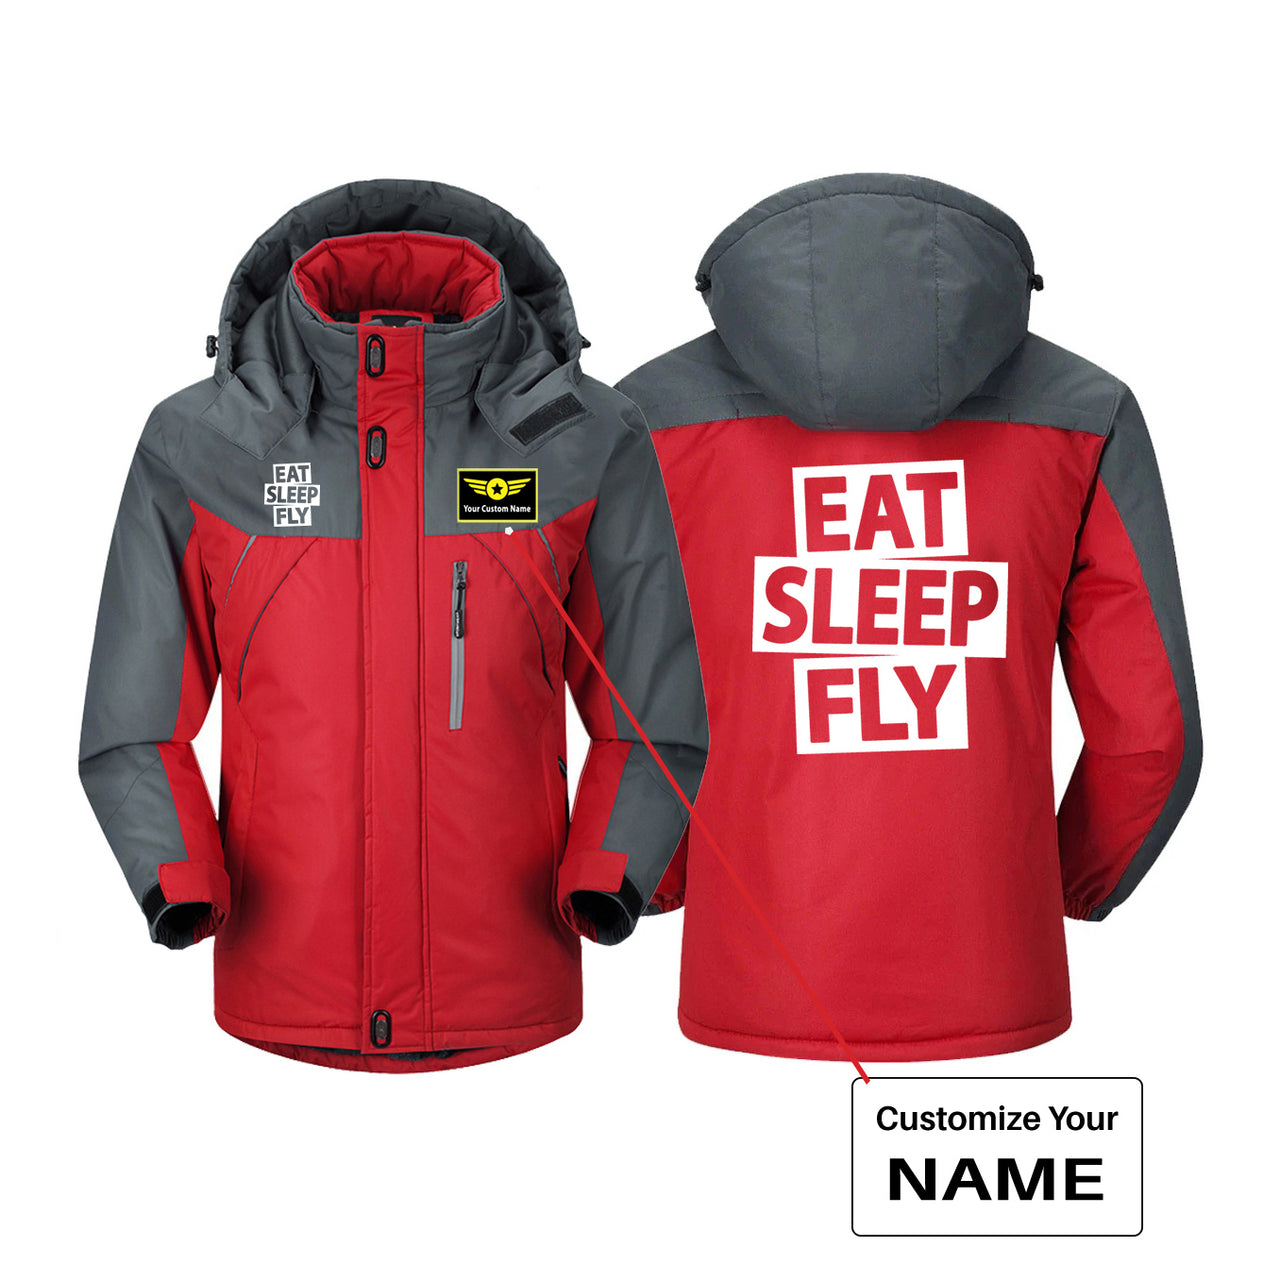 Eat Sleep Fly Designed Thick Winter Jackets